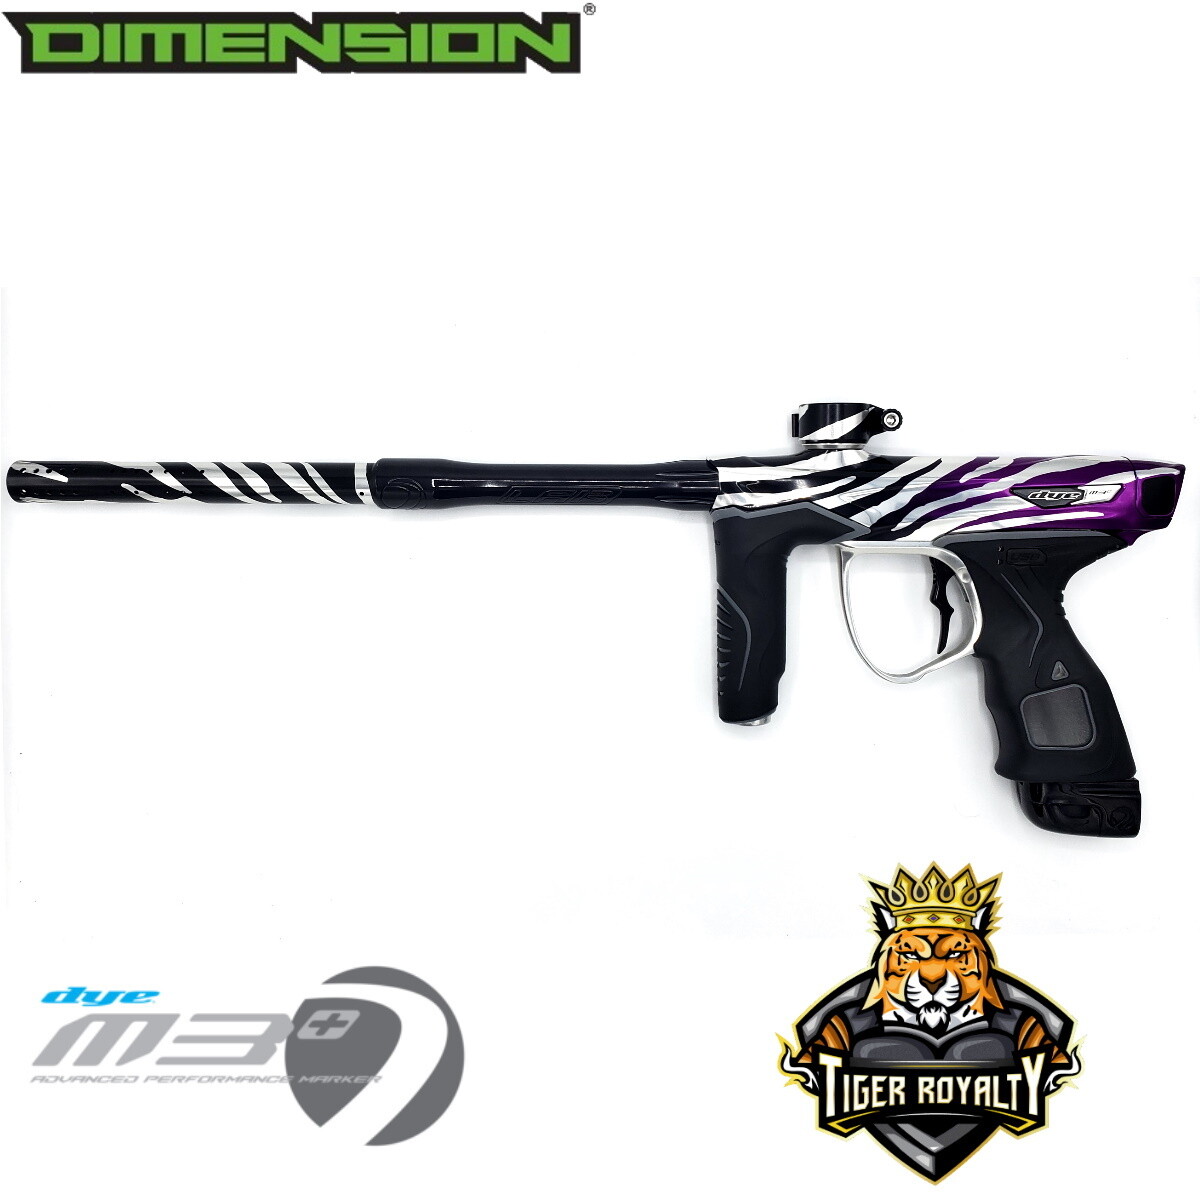 Dye M3+ - Dimension Limited Edition 1 of 1 / Tiger Royalty - Plum Sunday